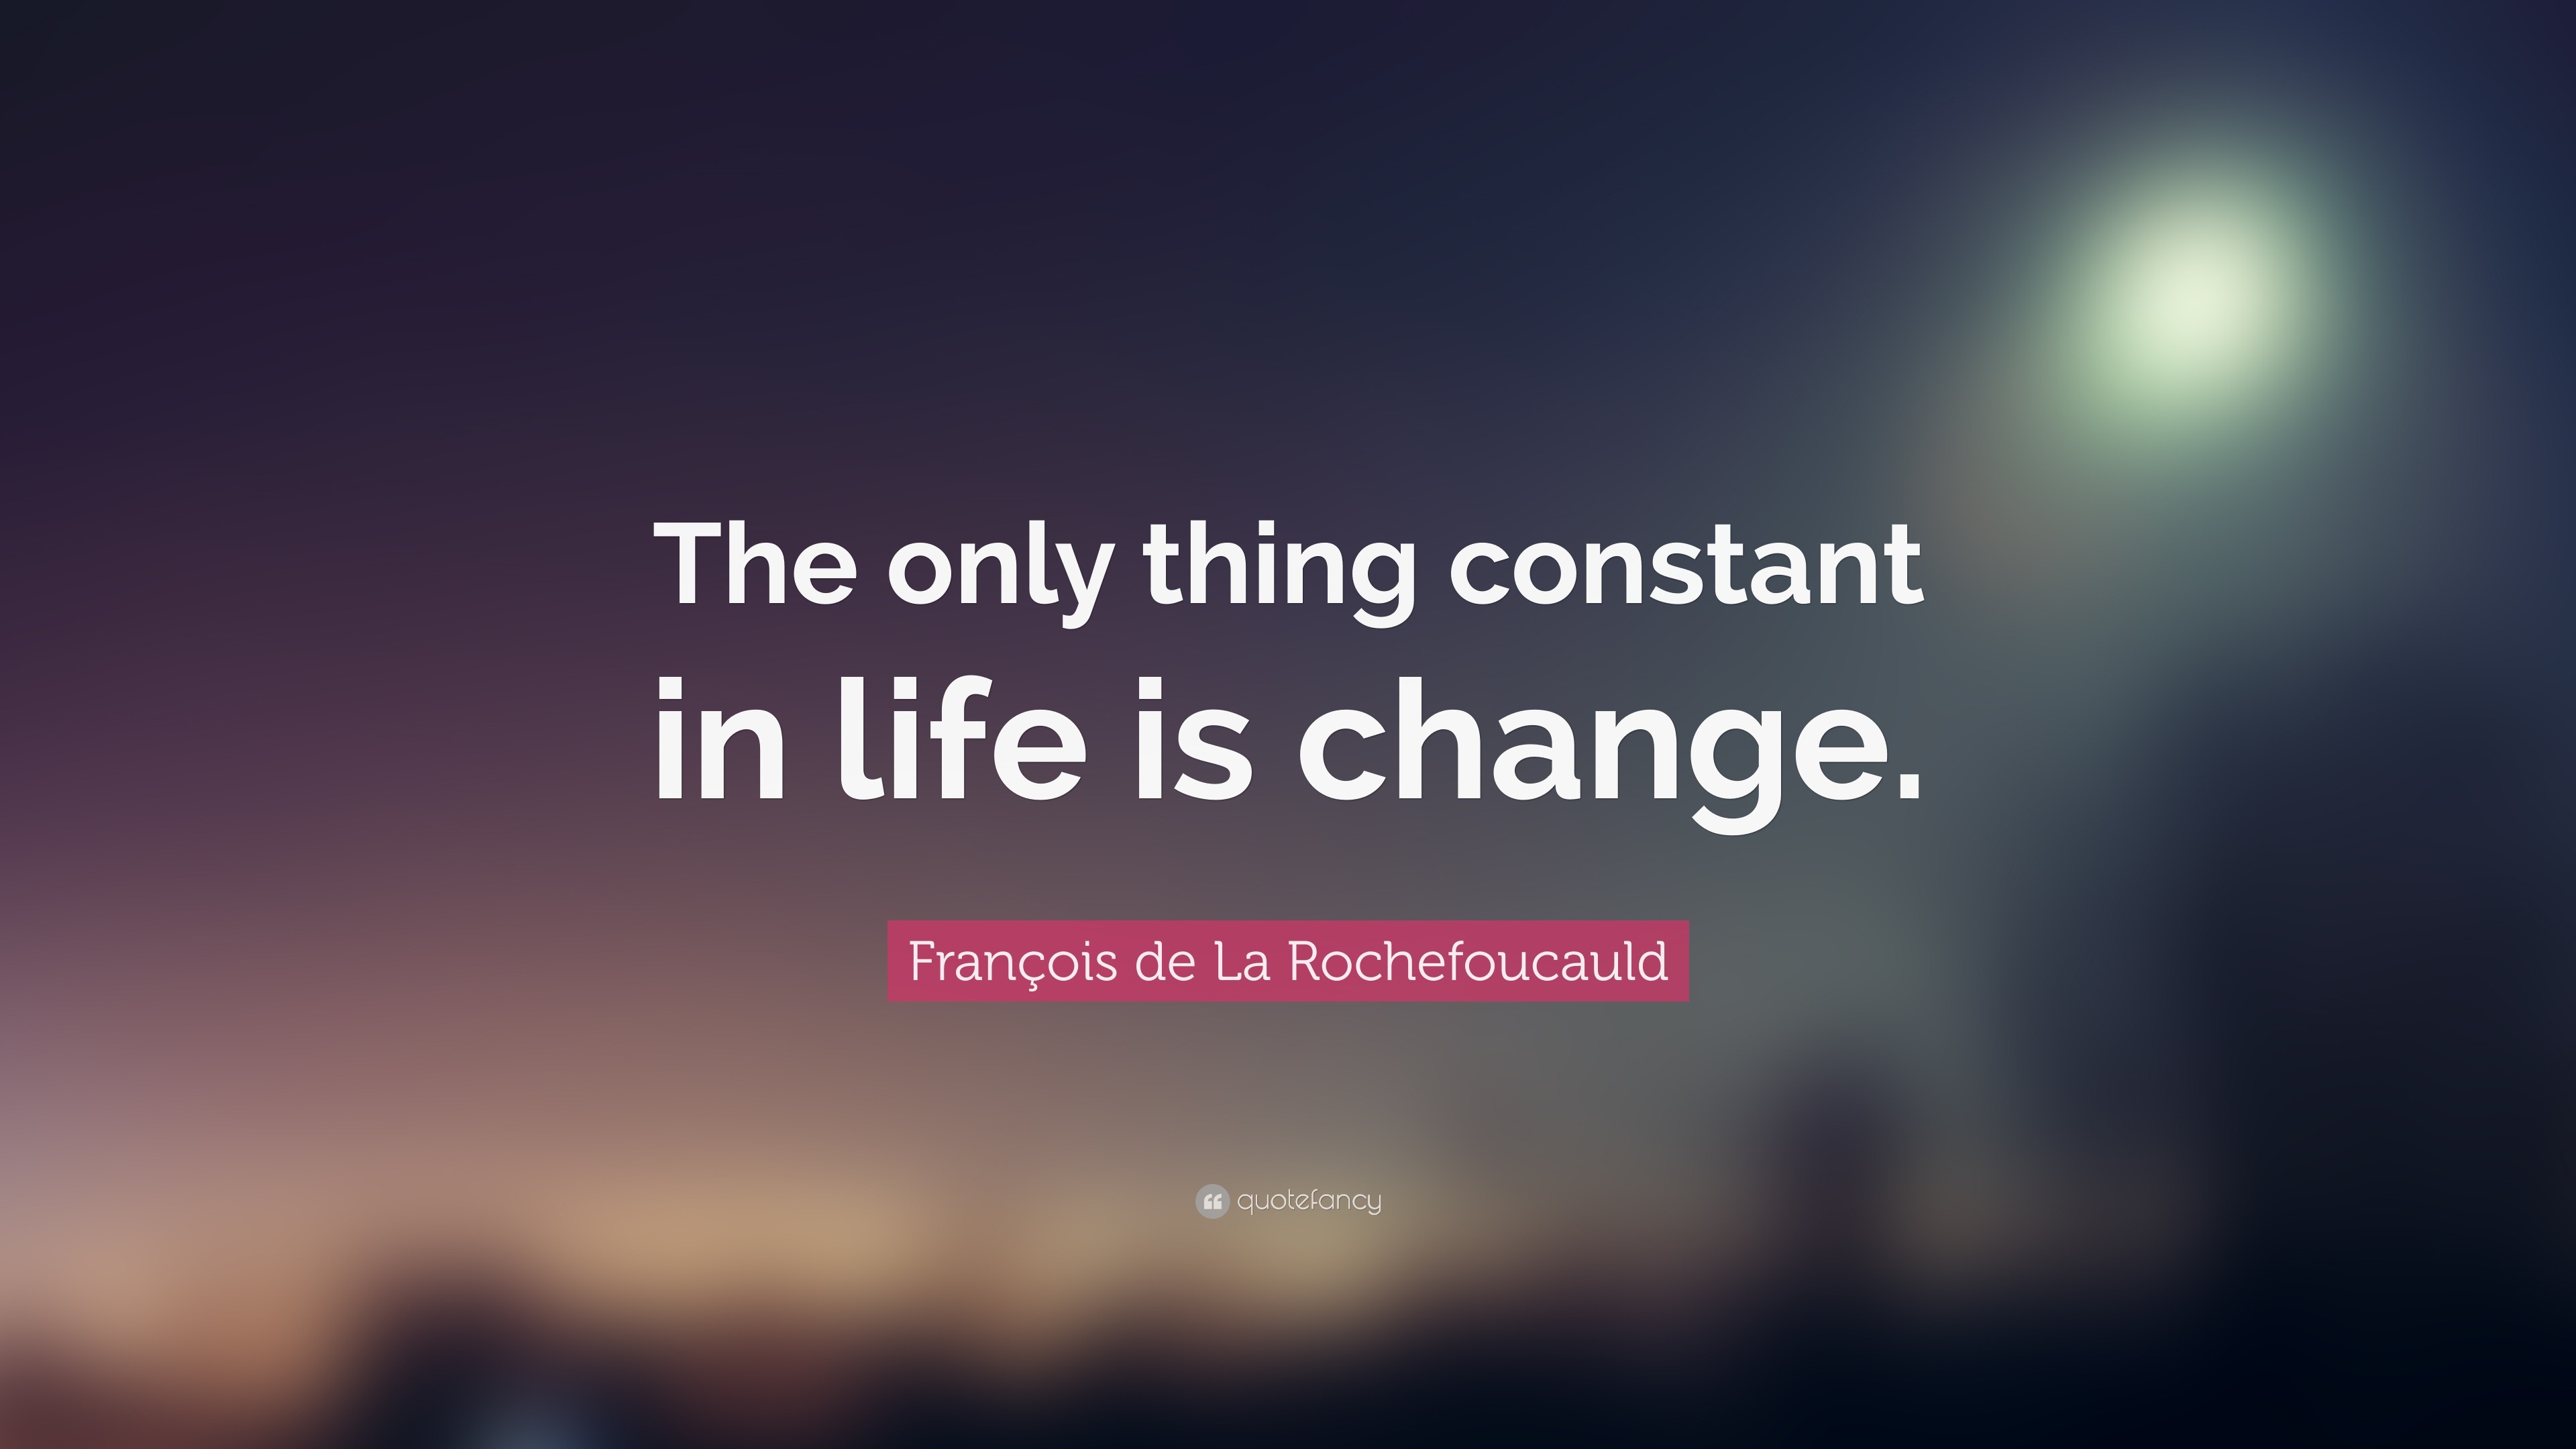 Fran§ois de La Rochefoucauld Quote “The only thing constant in life is change